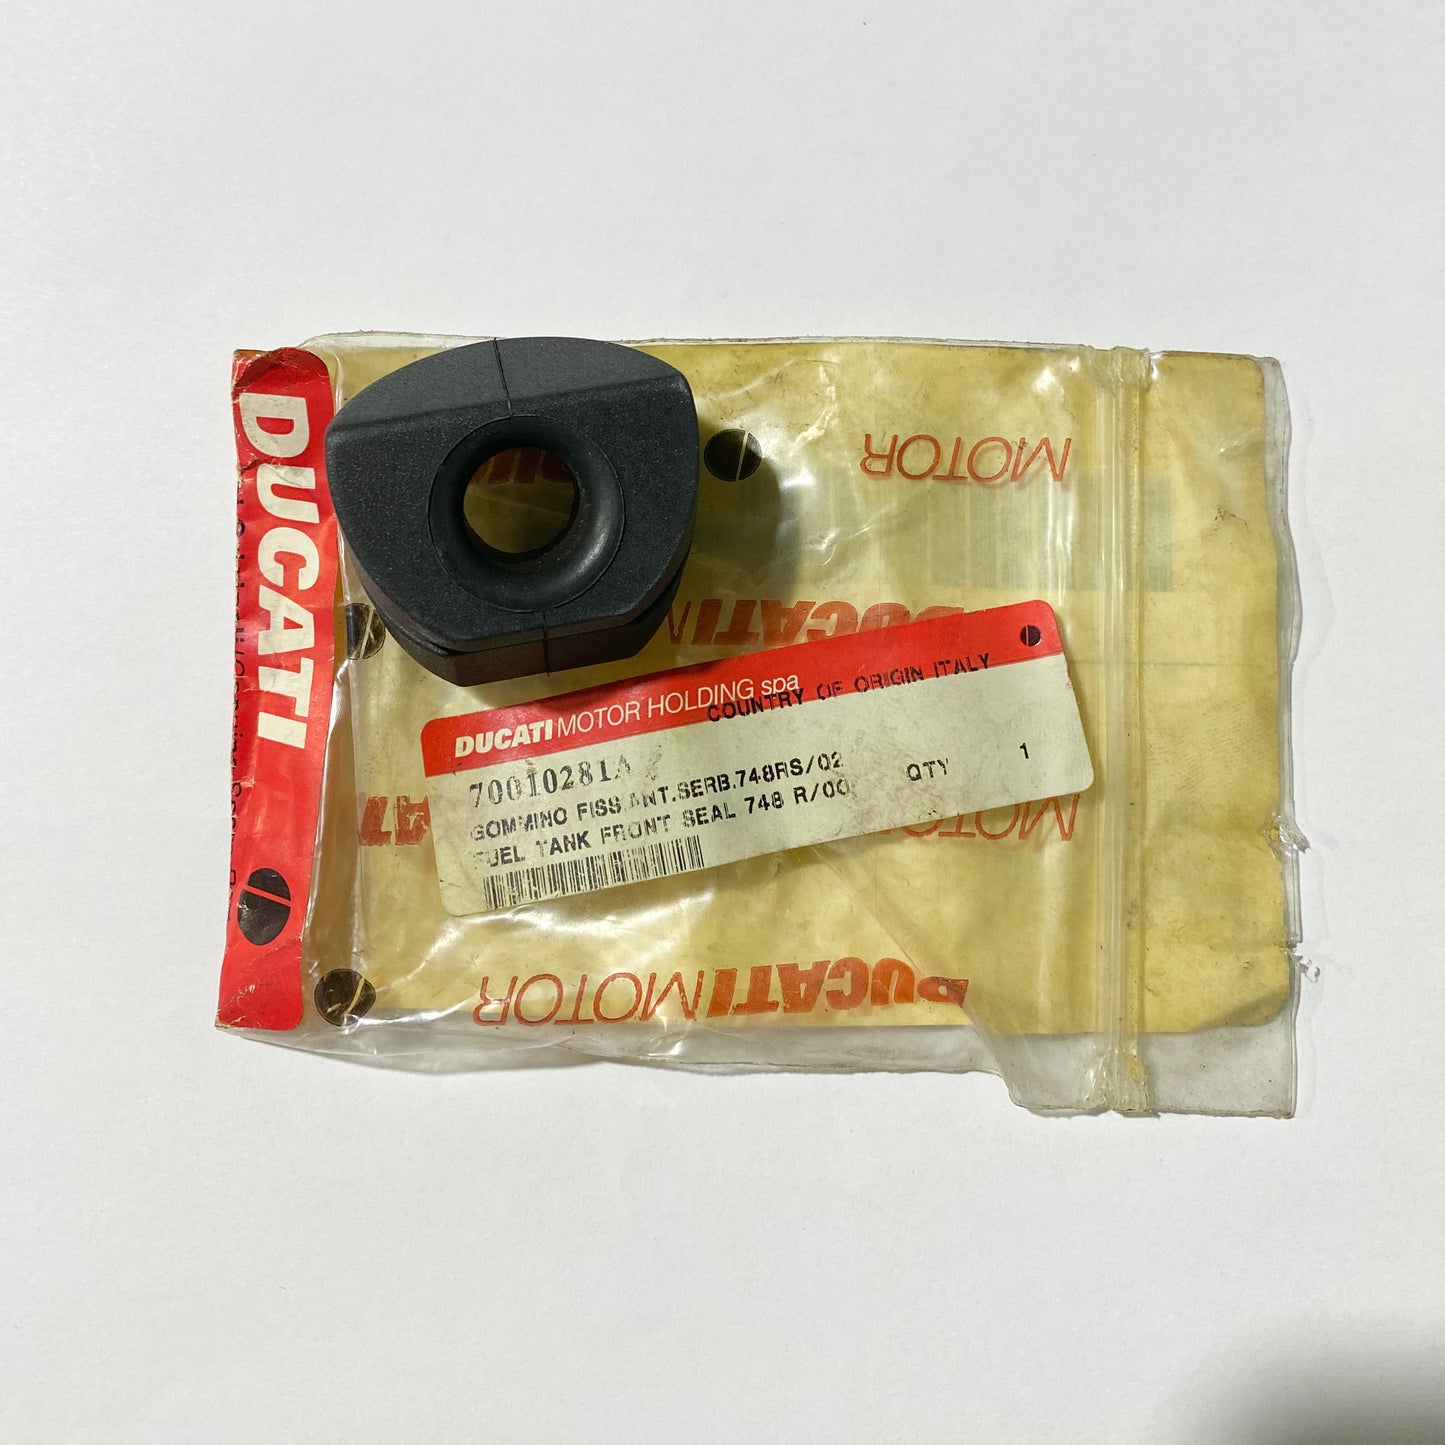 DUCATI FUEL TANK FRONT SEAL 748 R/00. RUBBER PAD 70010281A